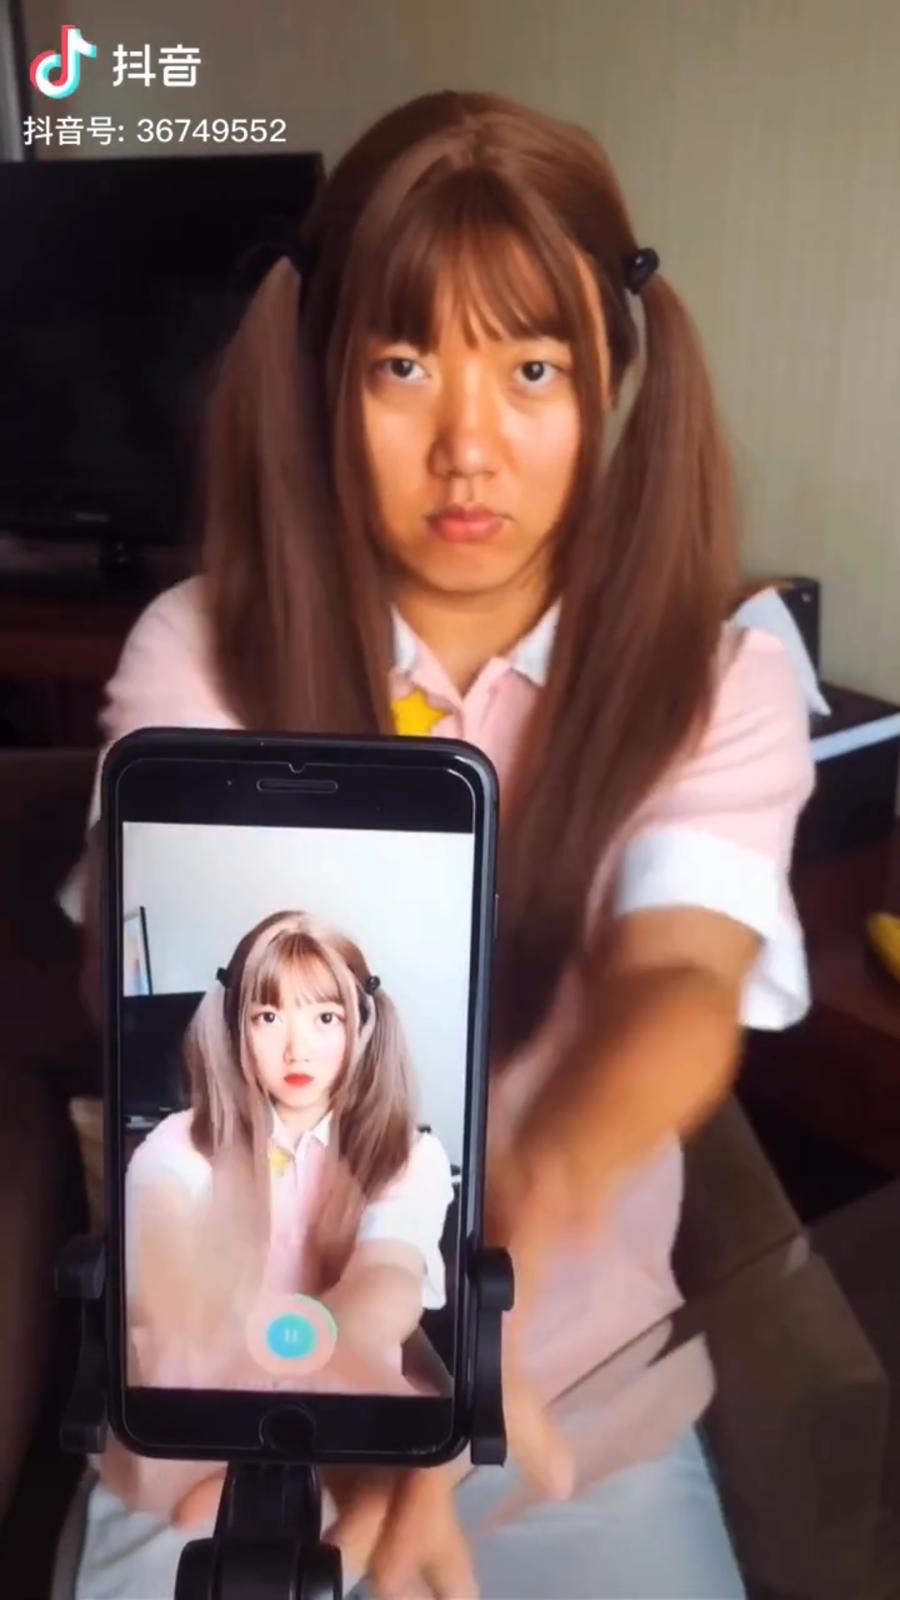 [Image] Chinese, uncle develops app that can be a beautiful girl in an instant → Surprise voice in China